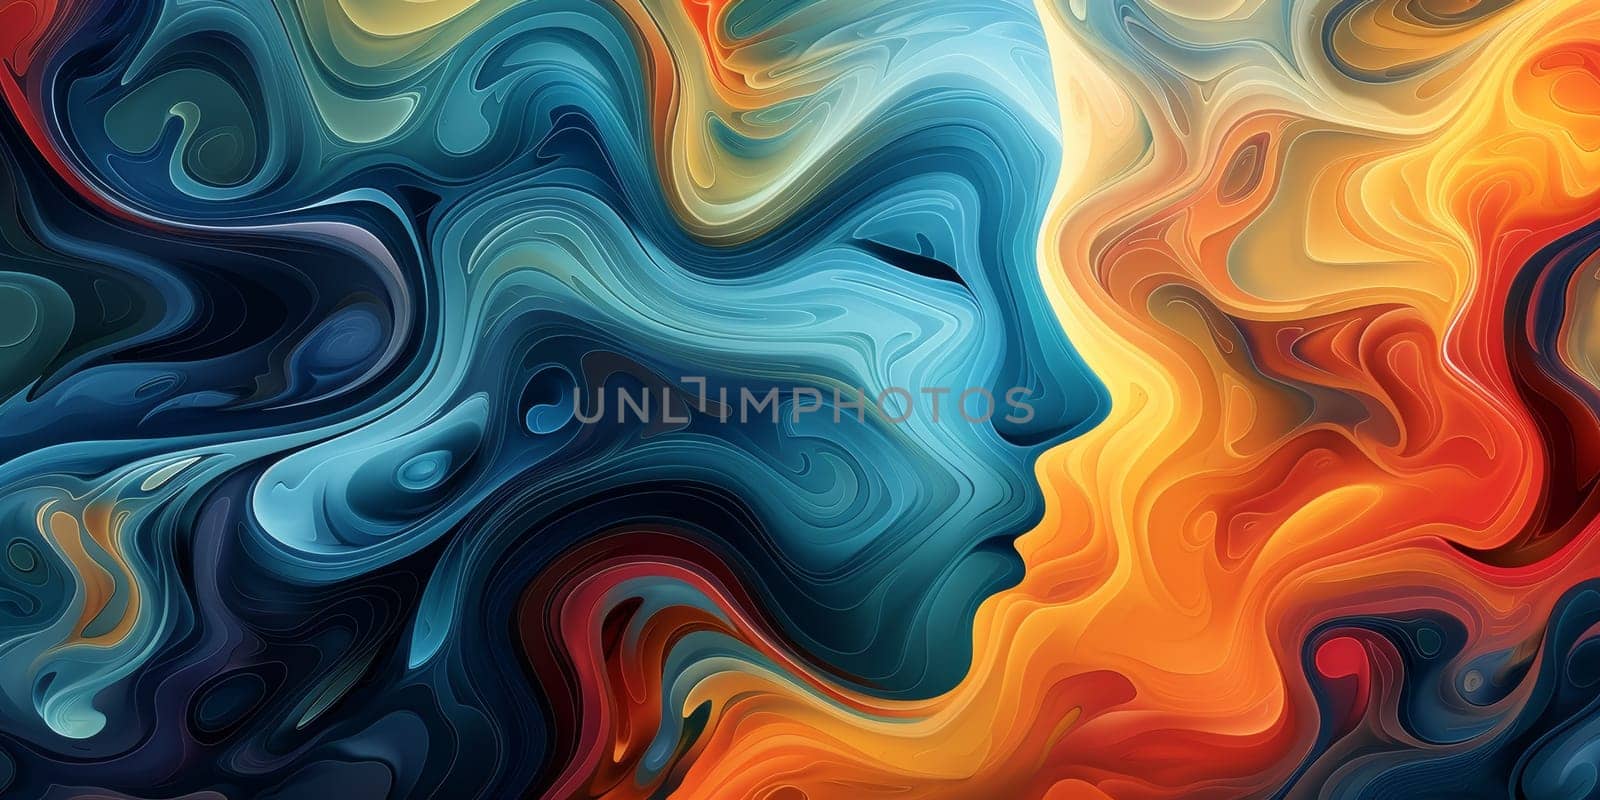 A colorful abstract painting of a woman's face with swirls